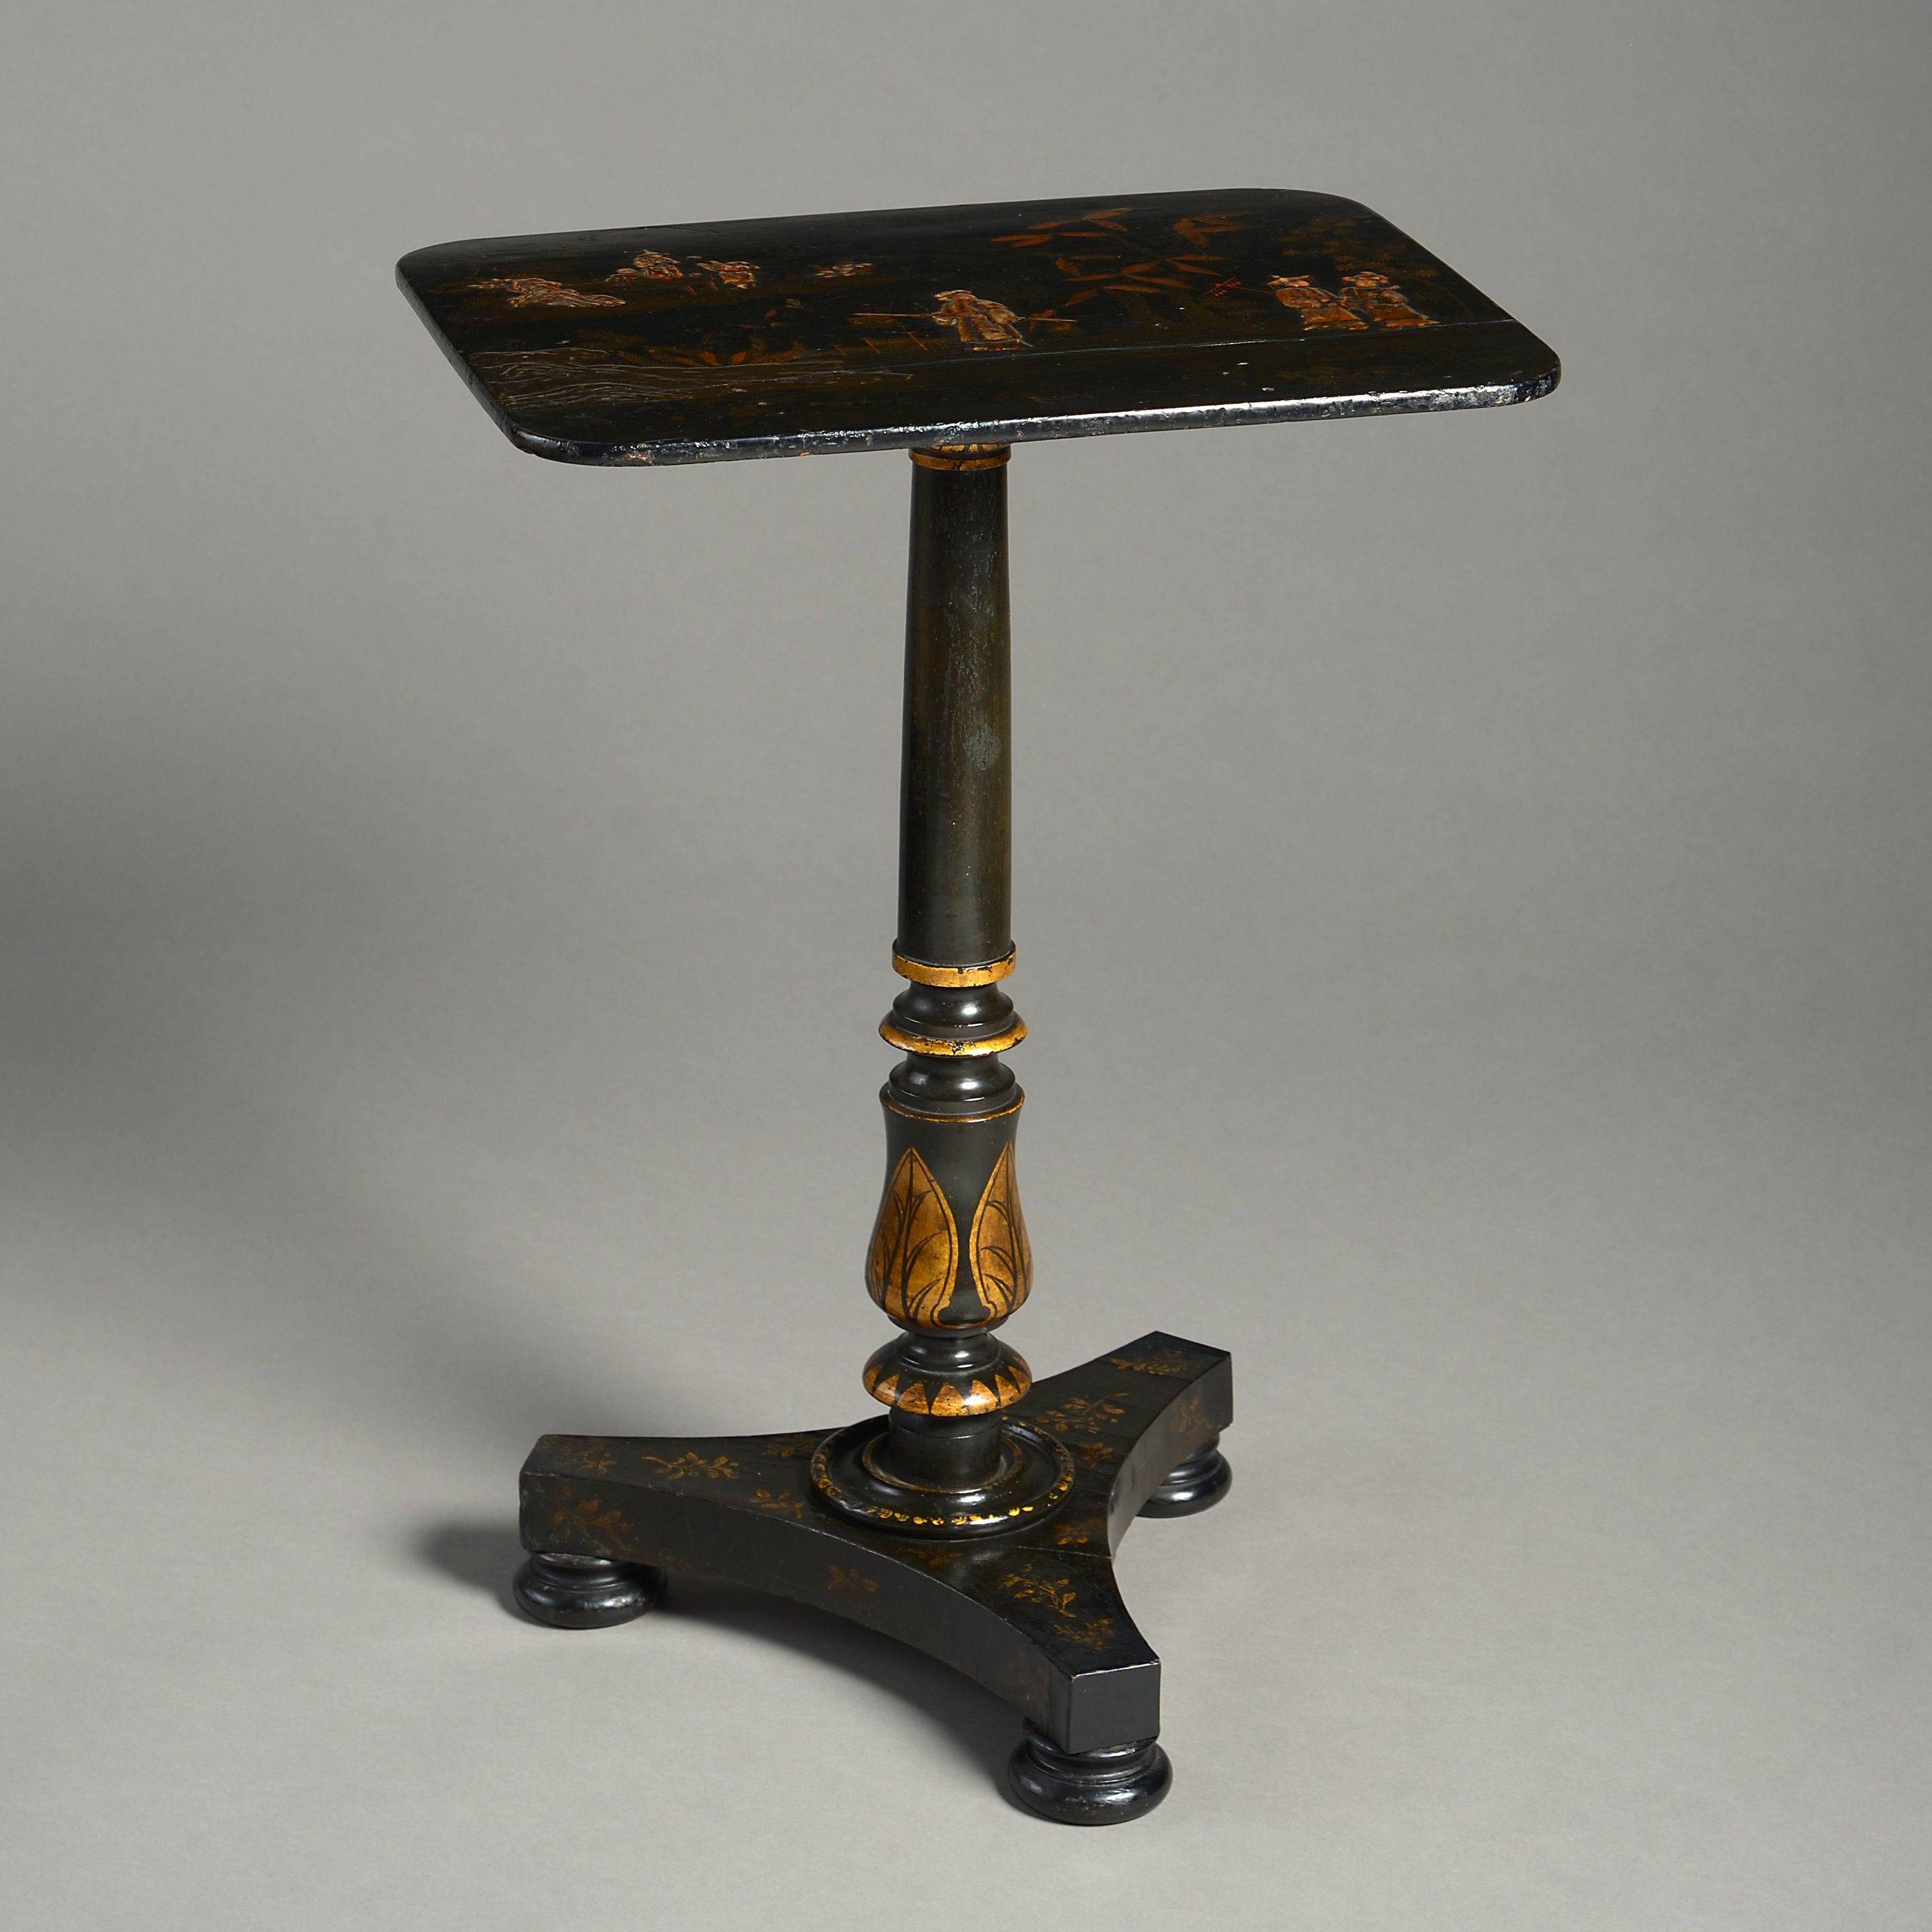 An early 19th century japanned occasional table, having a rectangular top decorated with chinoiseries, the turned stem and triform plinth base with gilded decoration.